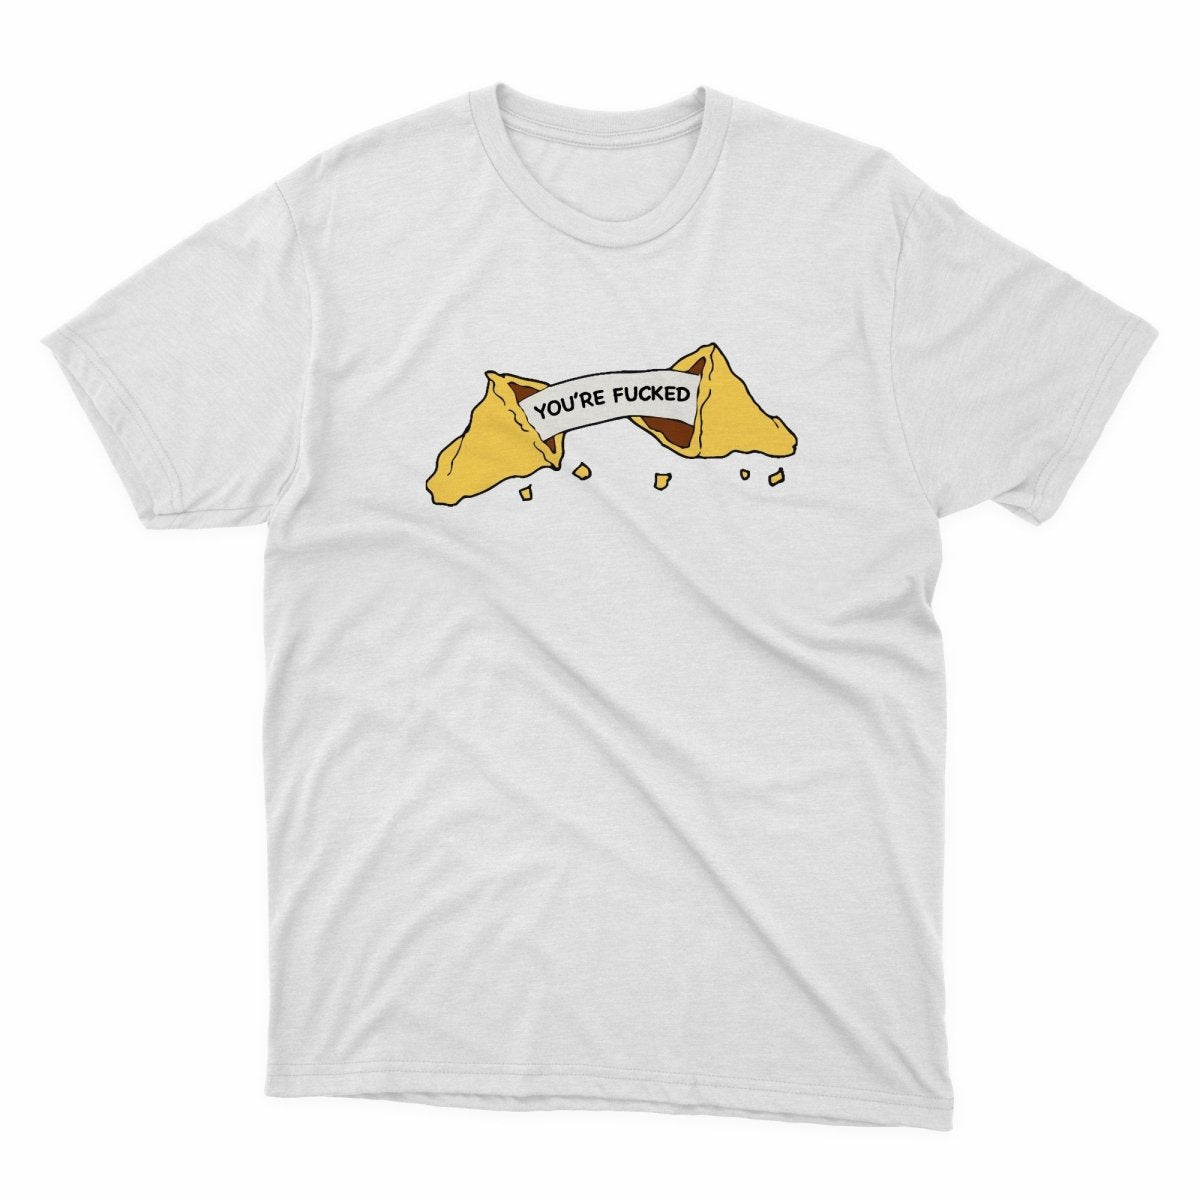 Fortune Cookie You're Fucked Shirt - stickerbullFortune Cookie You're Fucked ShirtShirtsPrintifystickerbull31132585937292188824WhiteSa white t - shirt with a picture of two slices of pizza on it